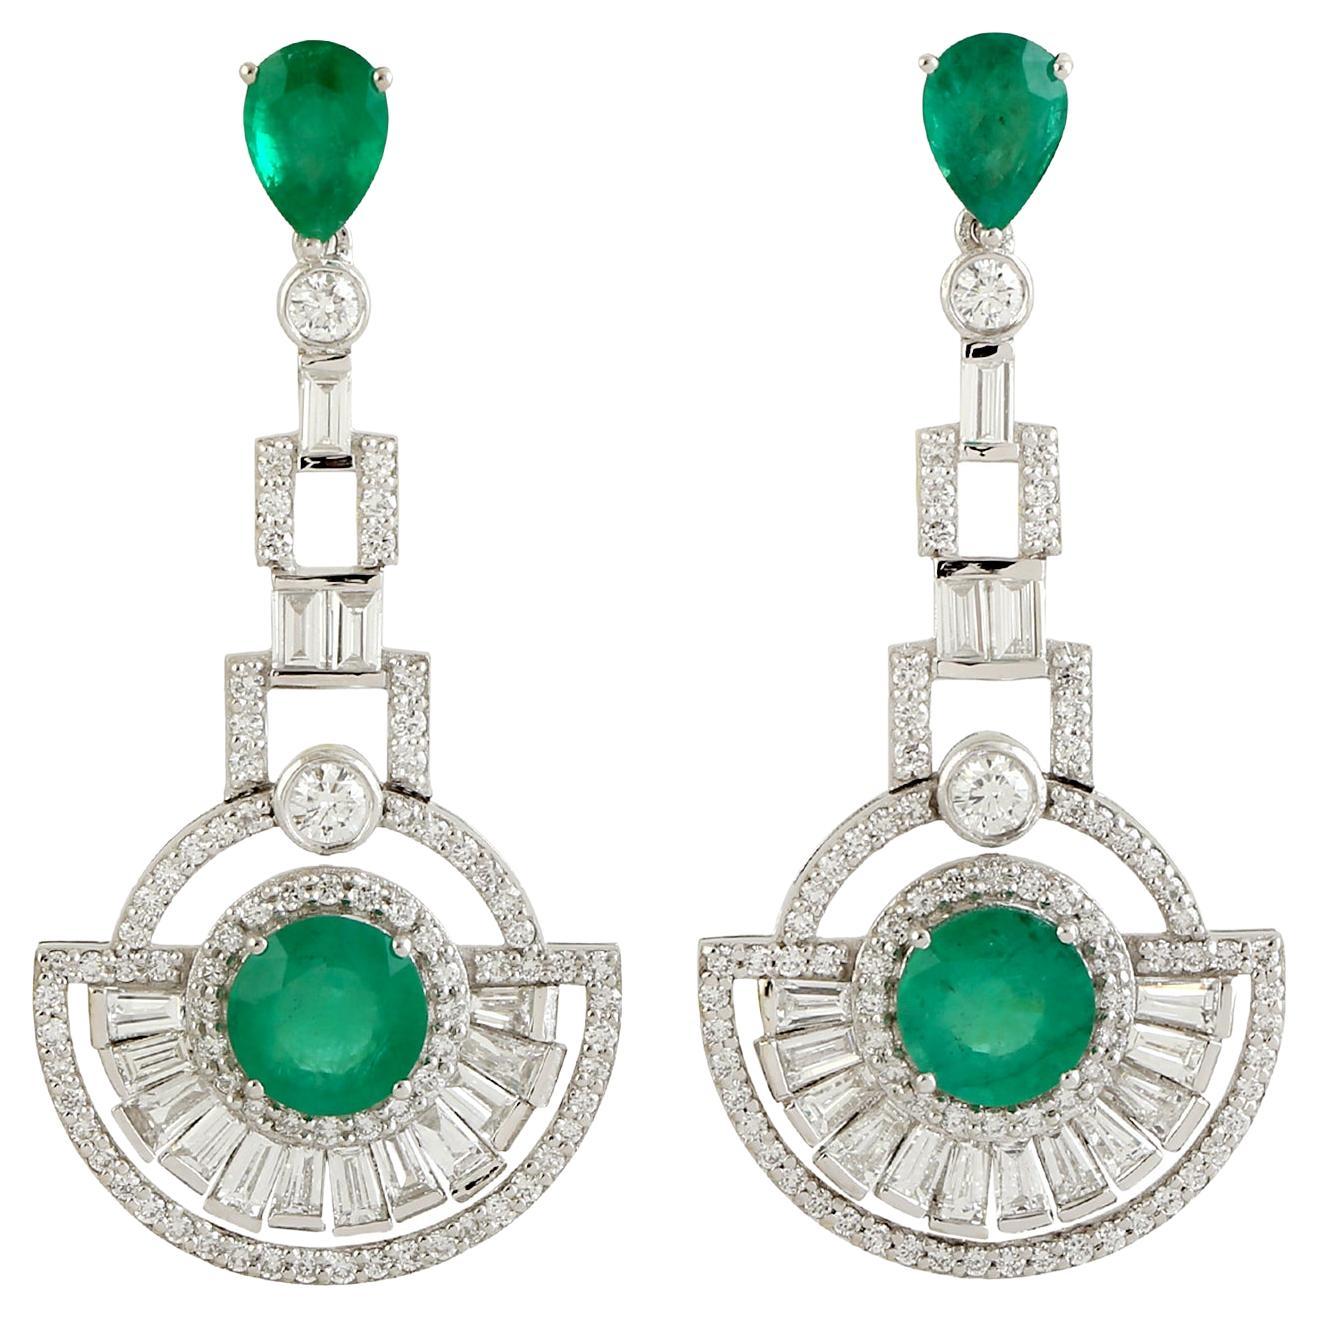 Half Circle Dangle Earrings With Emerald & Diamonds Made In 18k White Gold